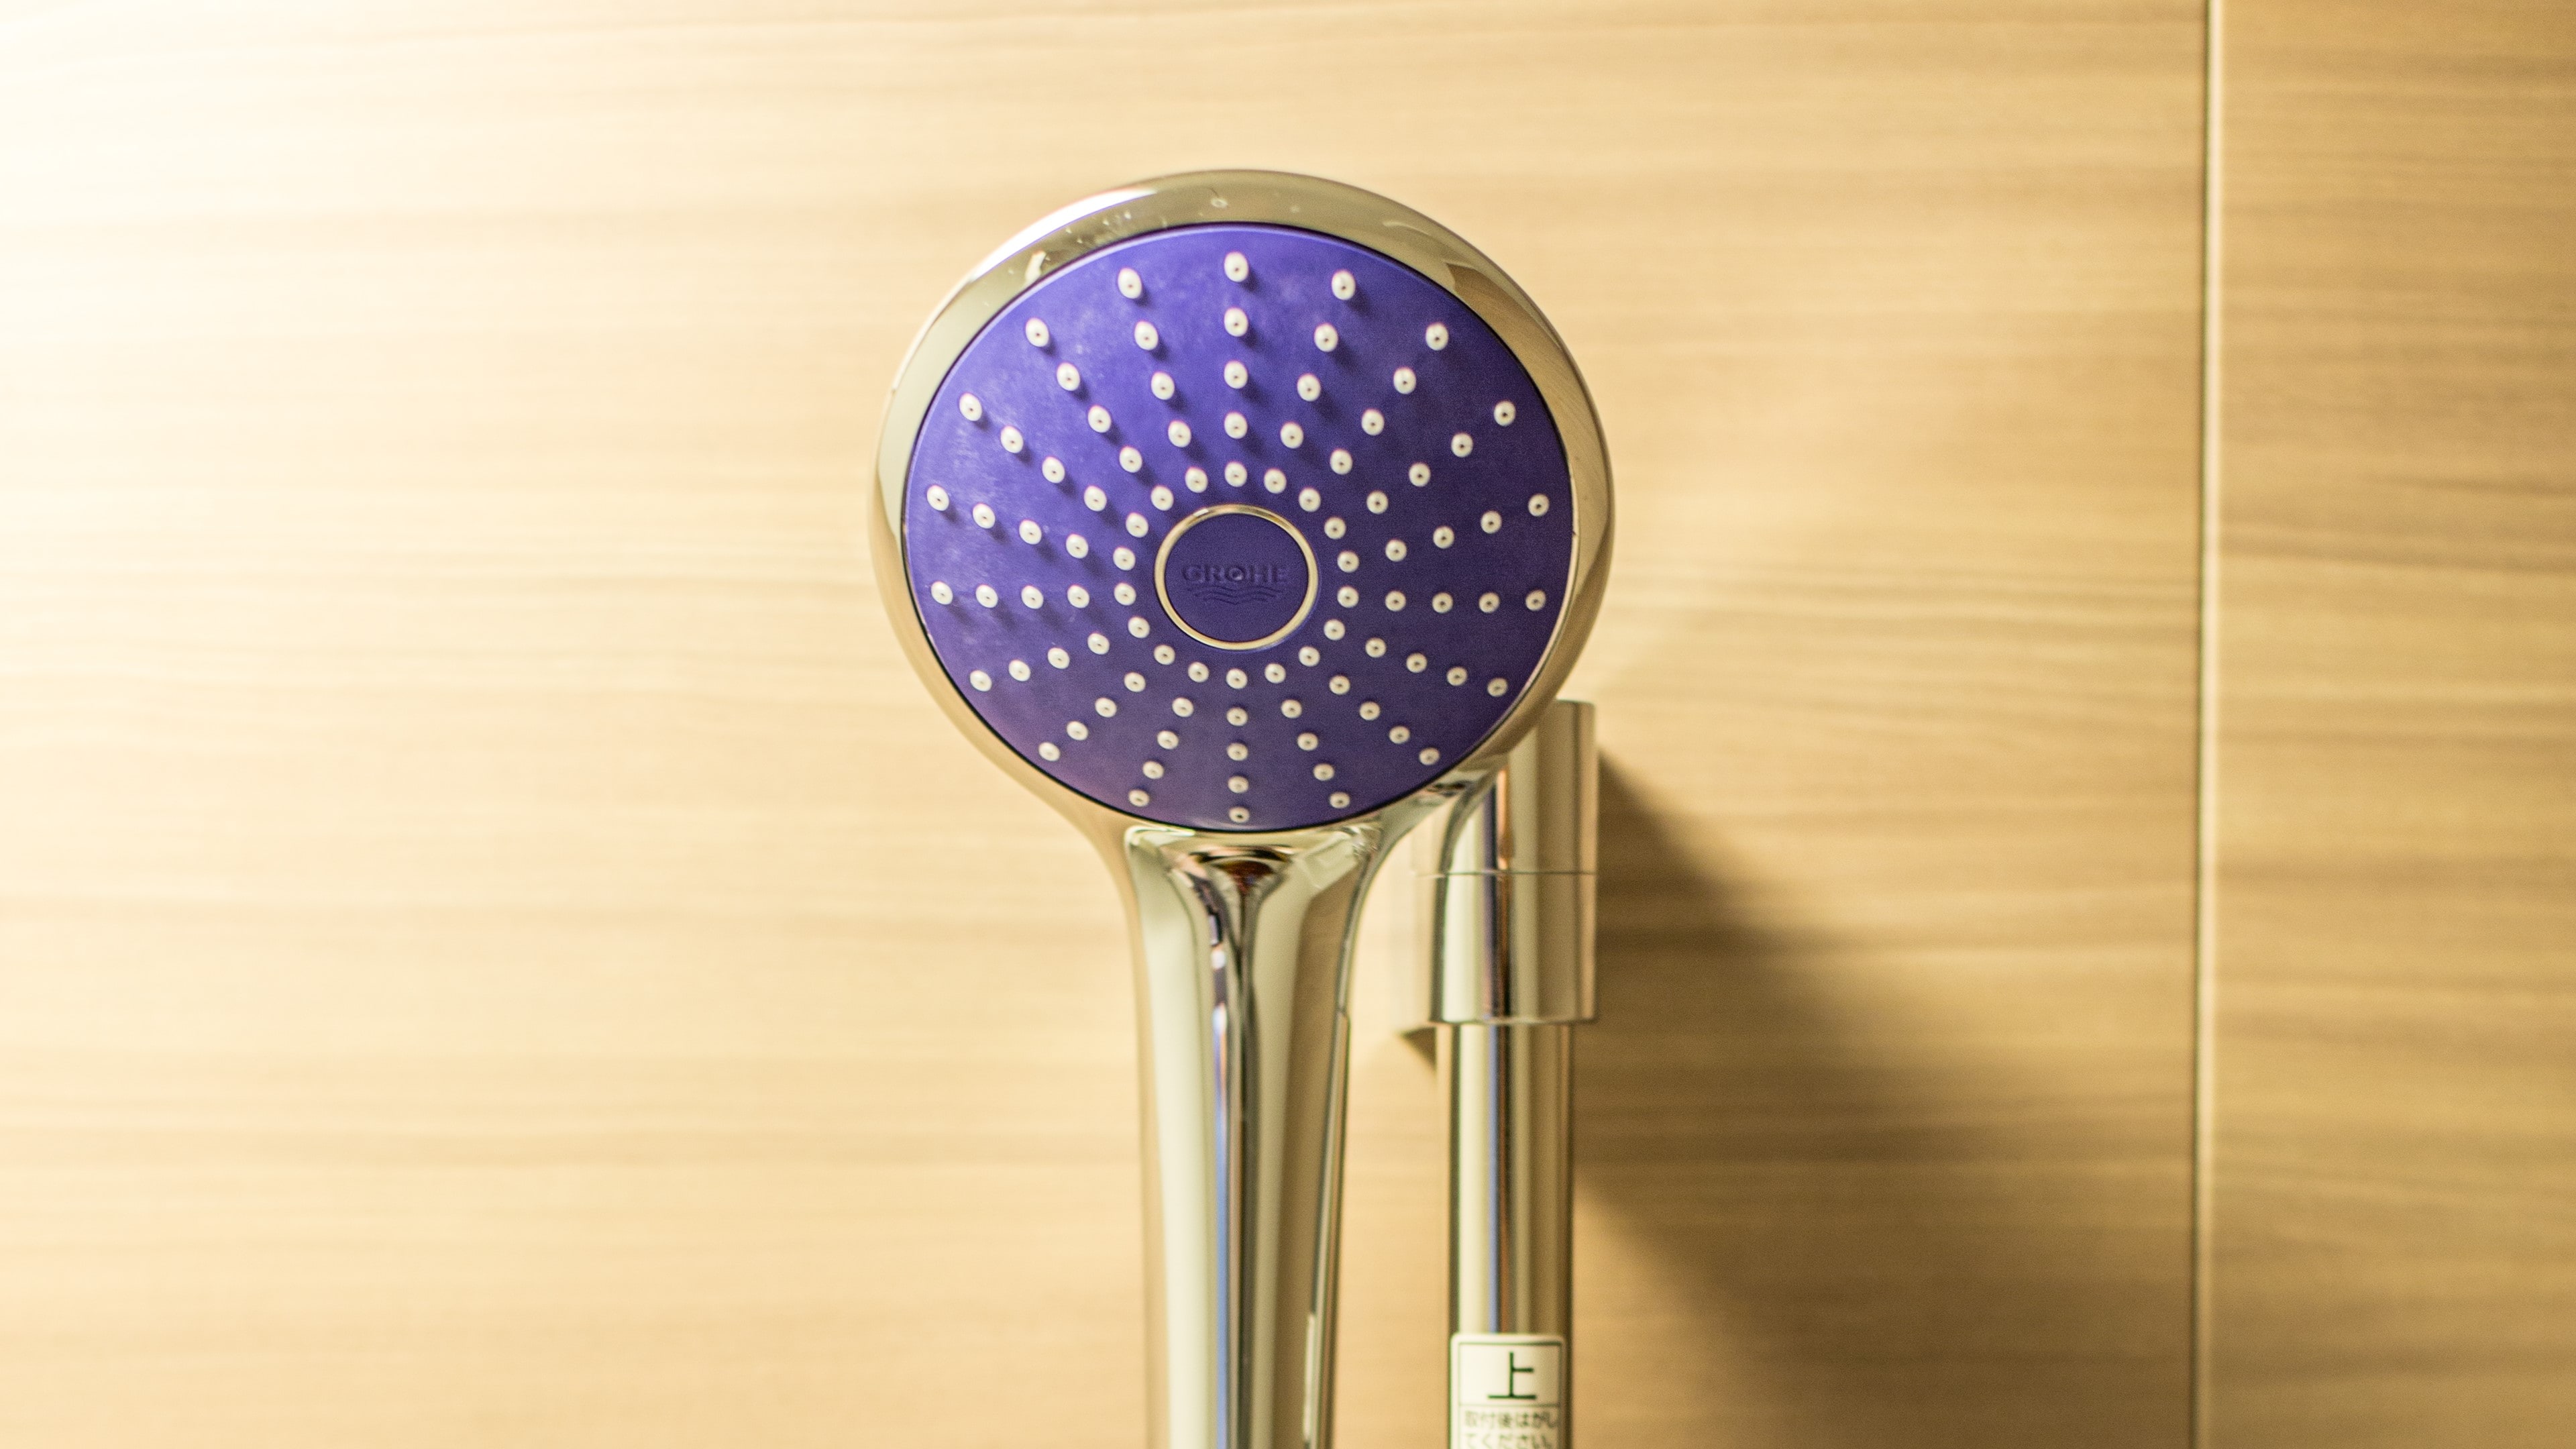  Shower head "Euphoria made by Grohe, Germany". All 5 colors that are different for each room.